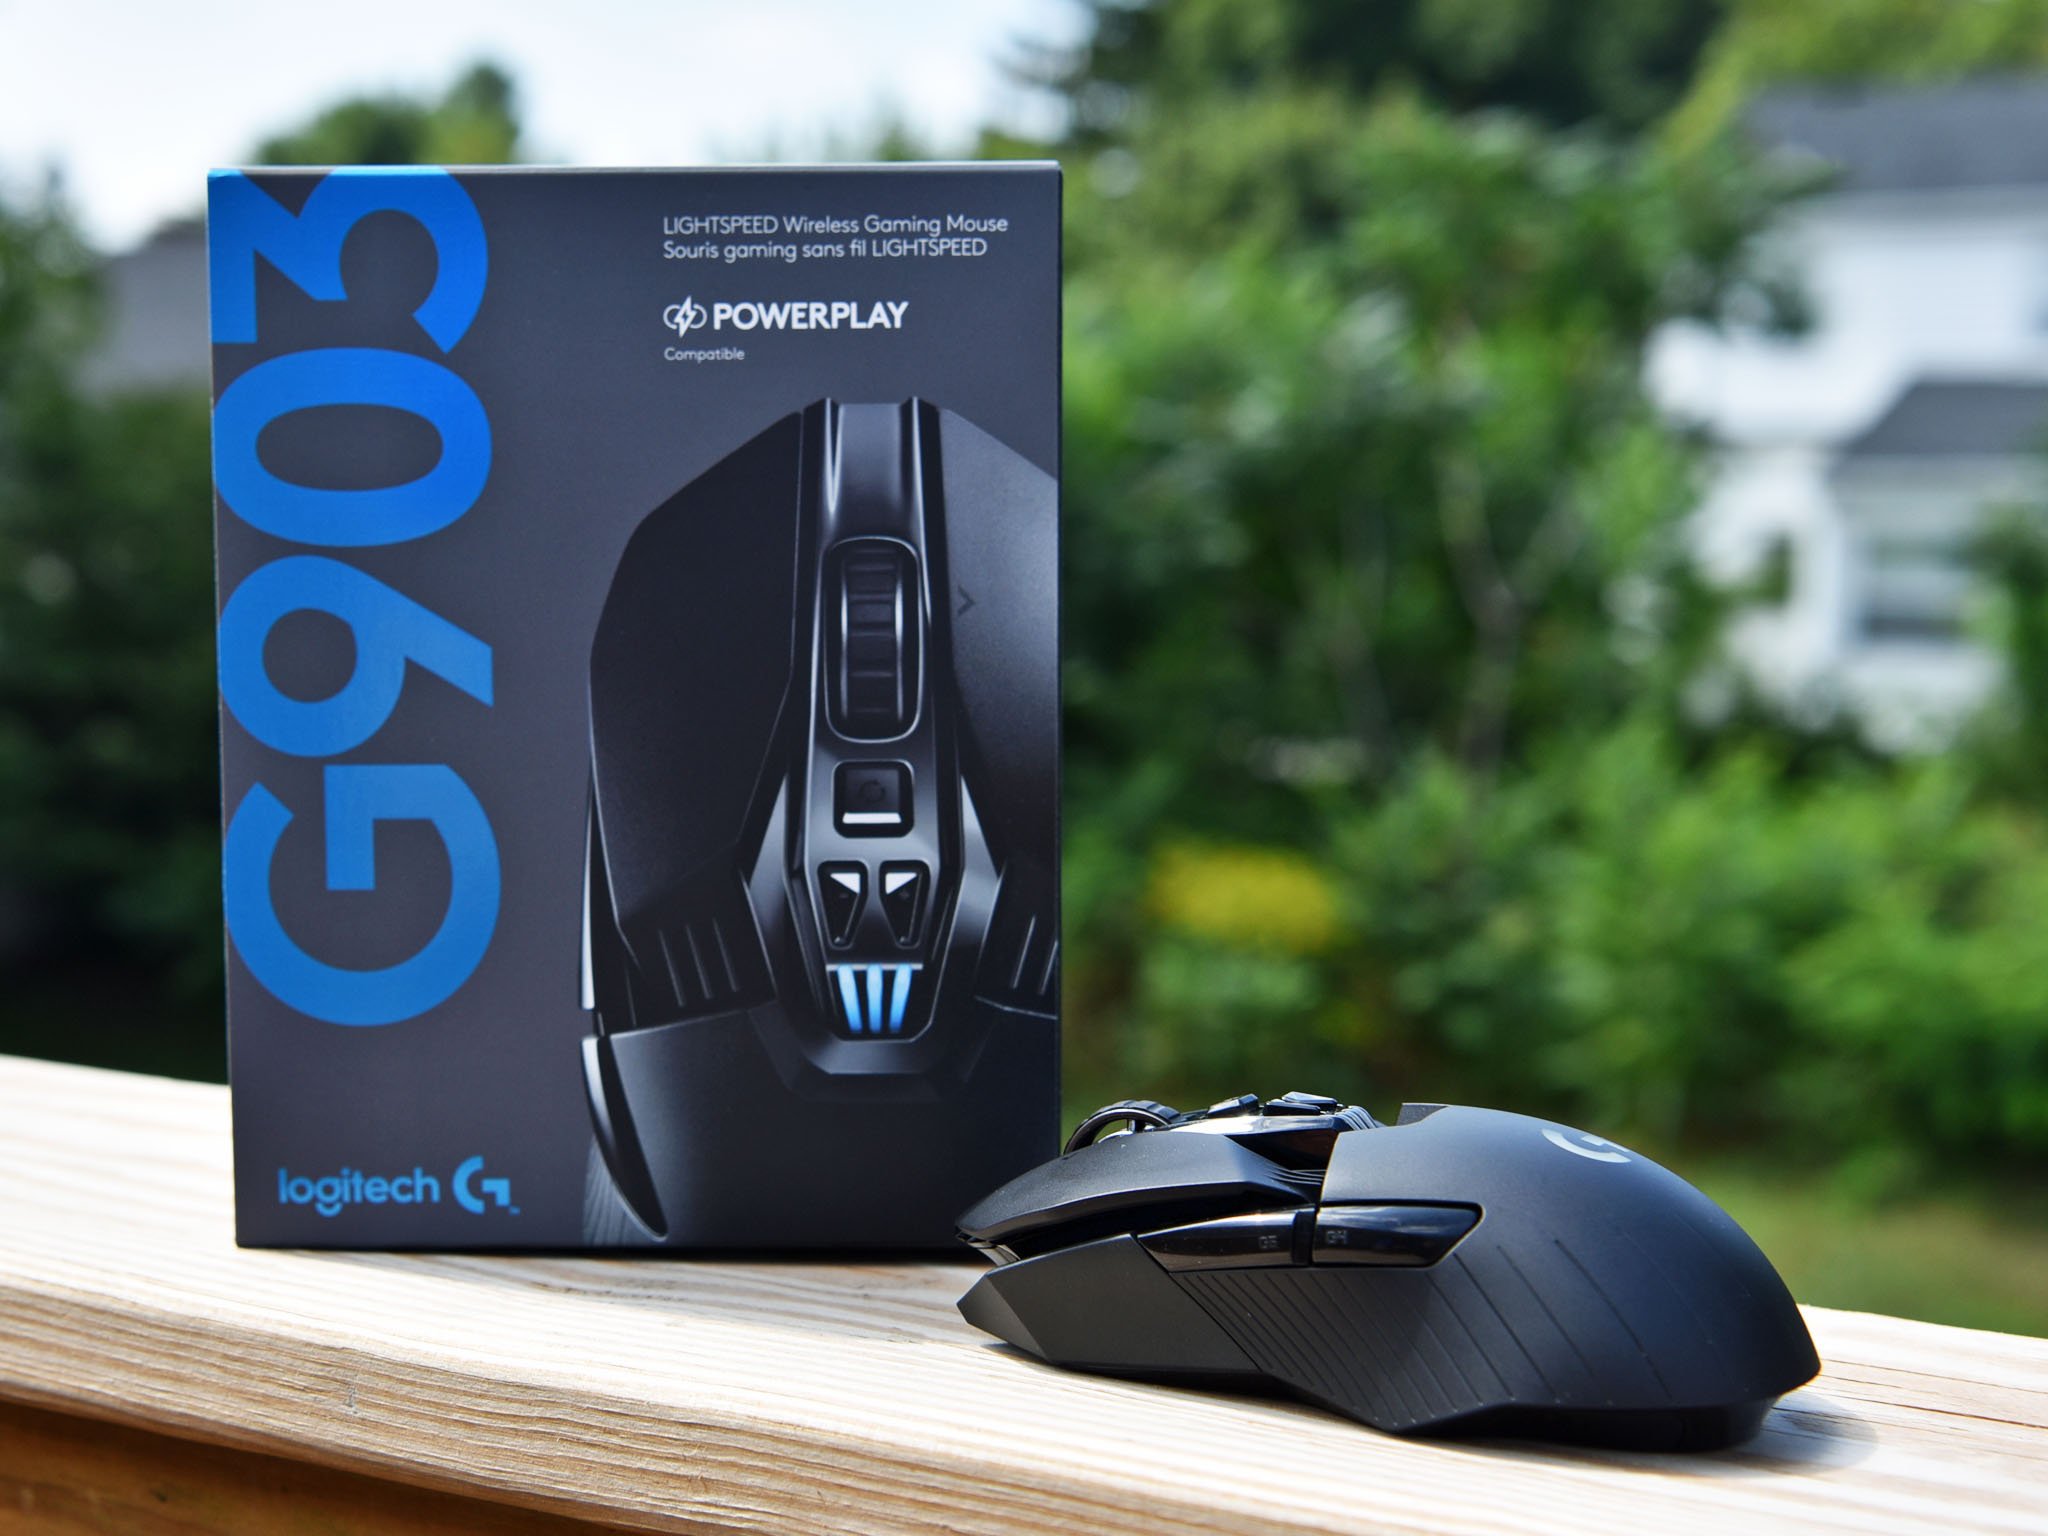 Logitech G903 review: A serious optical gaming mouse with